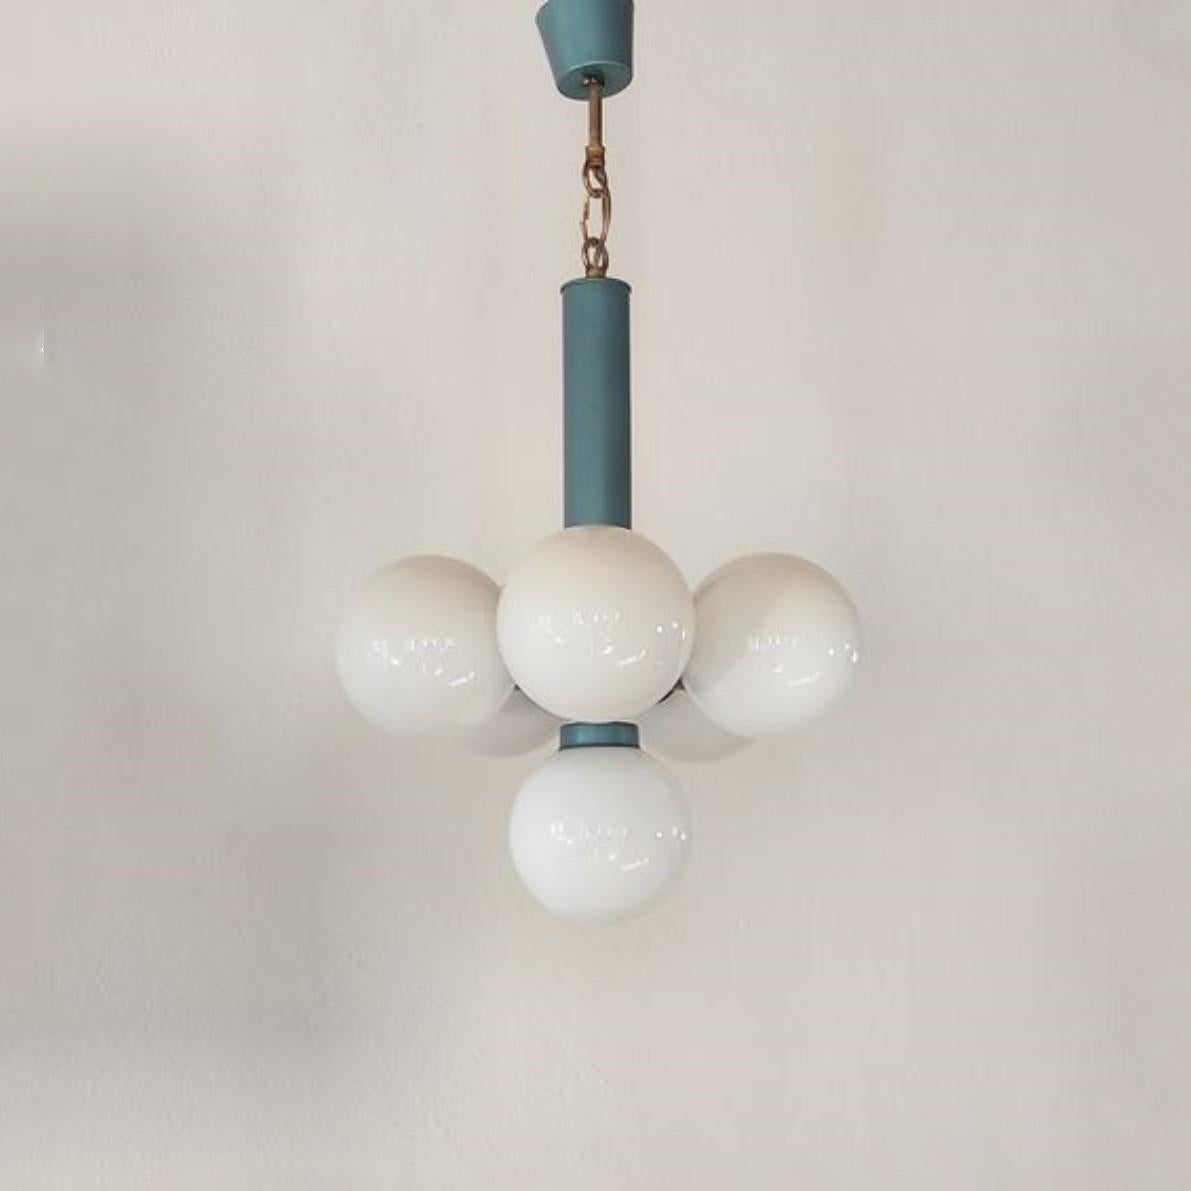 A beautiful Stilnovo style hand blown opaline glass six-light chandelier, Italy, 1960s. Enameled aluminum structure in petrol blue color and brass parts holding six hand blown opaline glass balloons in cluster shape. It takes 6 Edison E14 screw